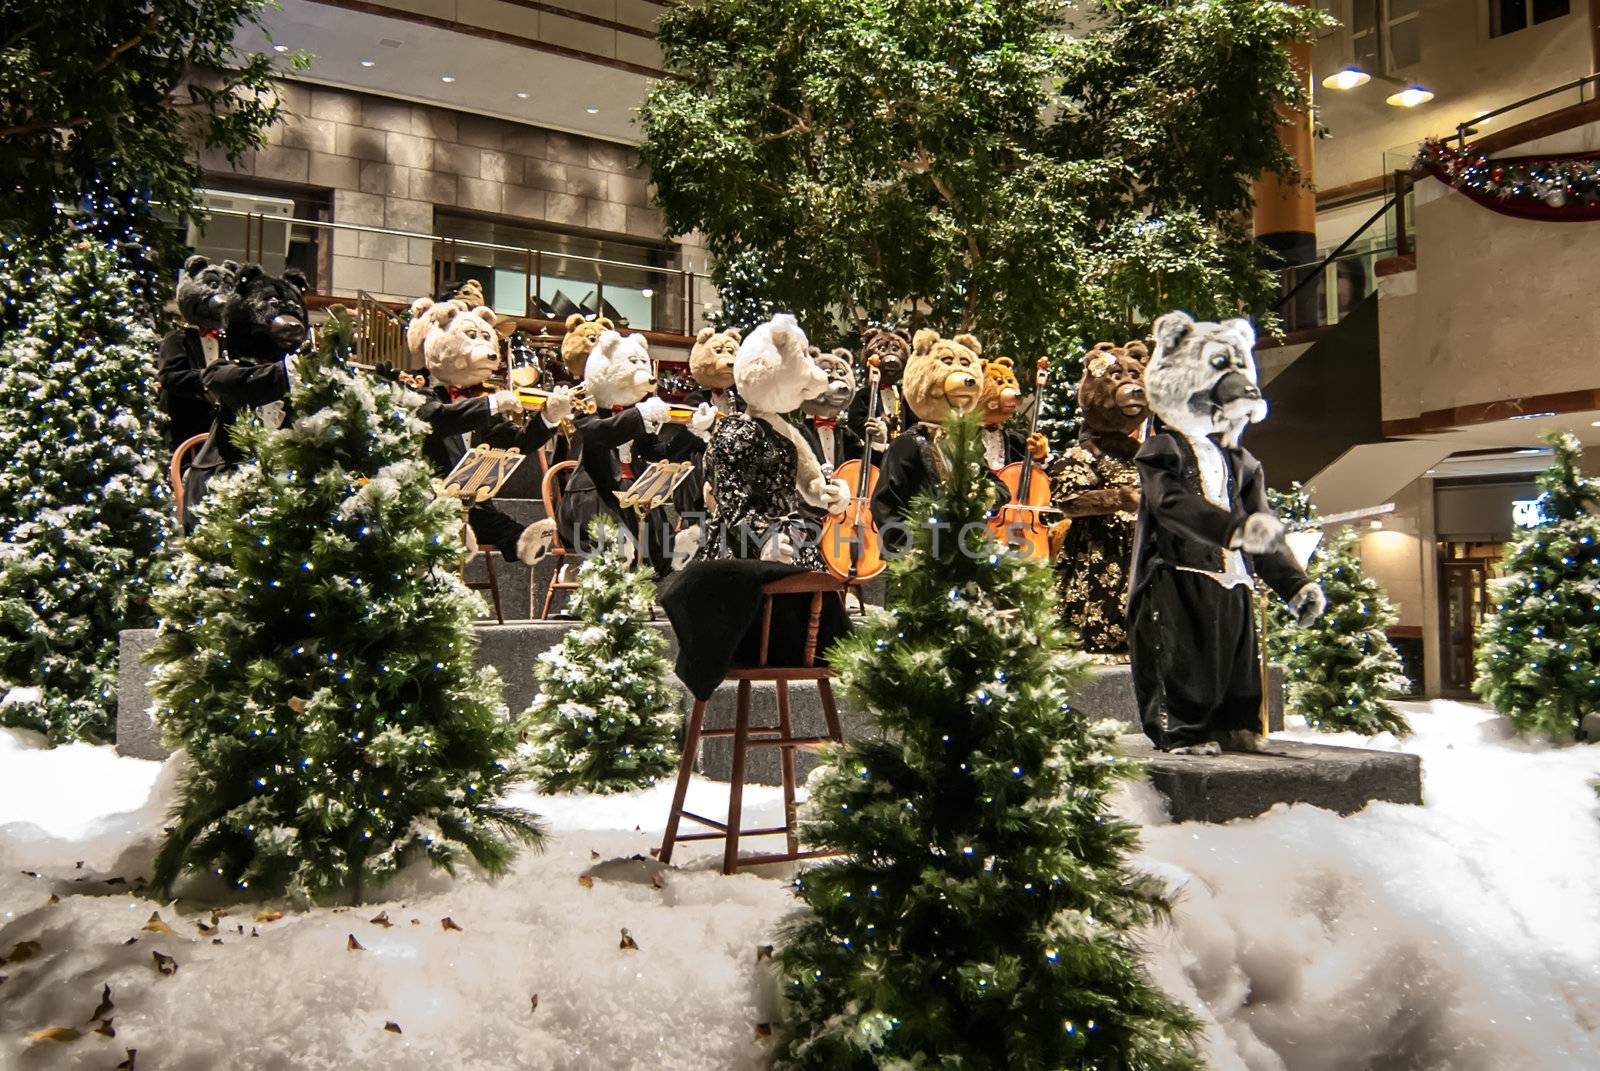 robotic bears playing at concert in the mall during christmas